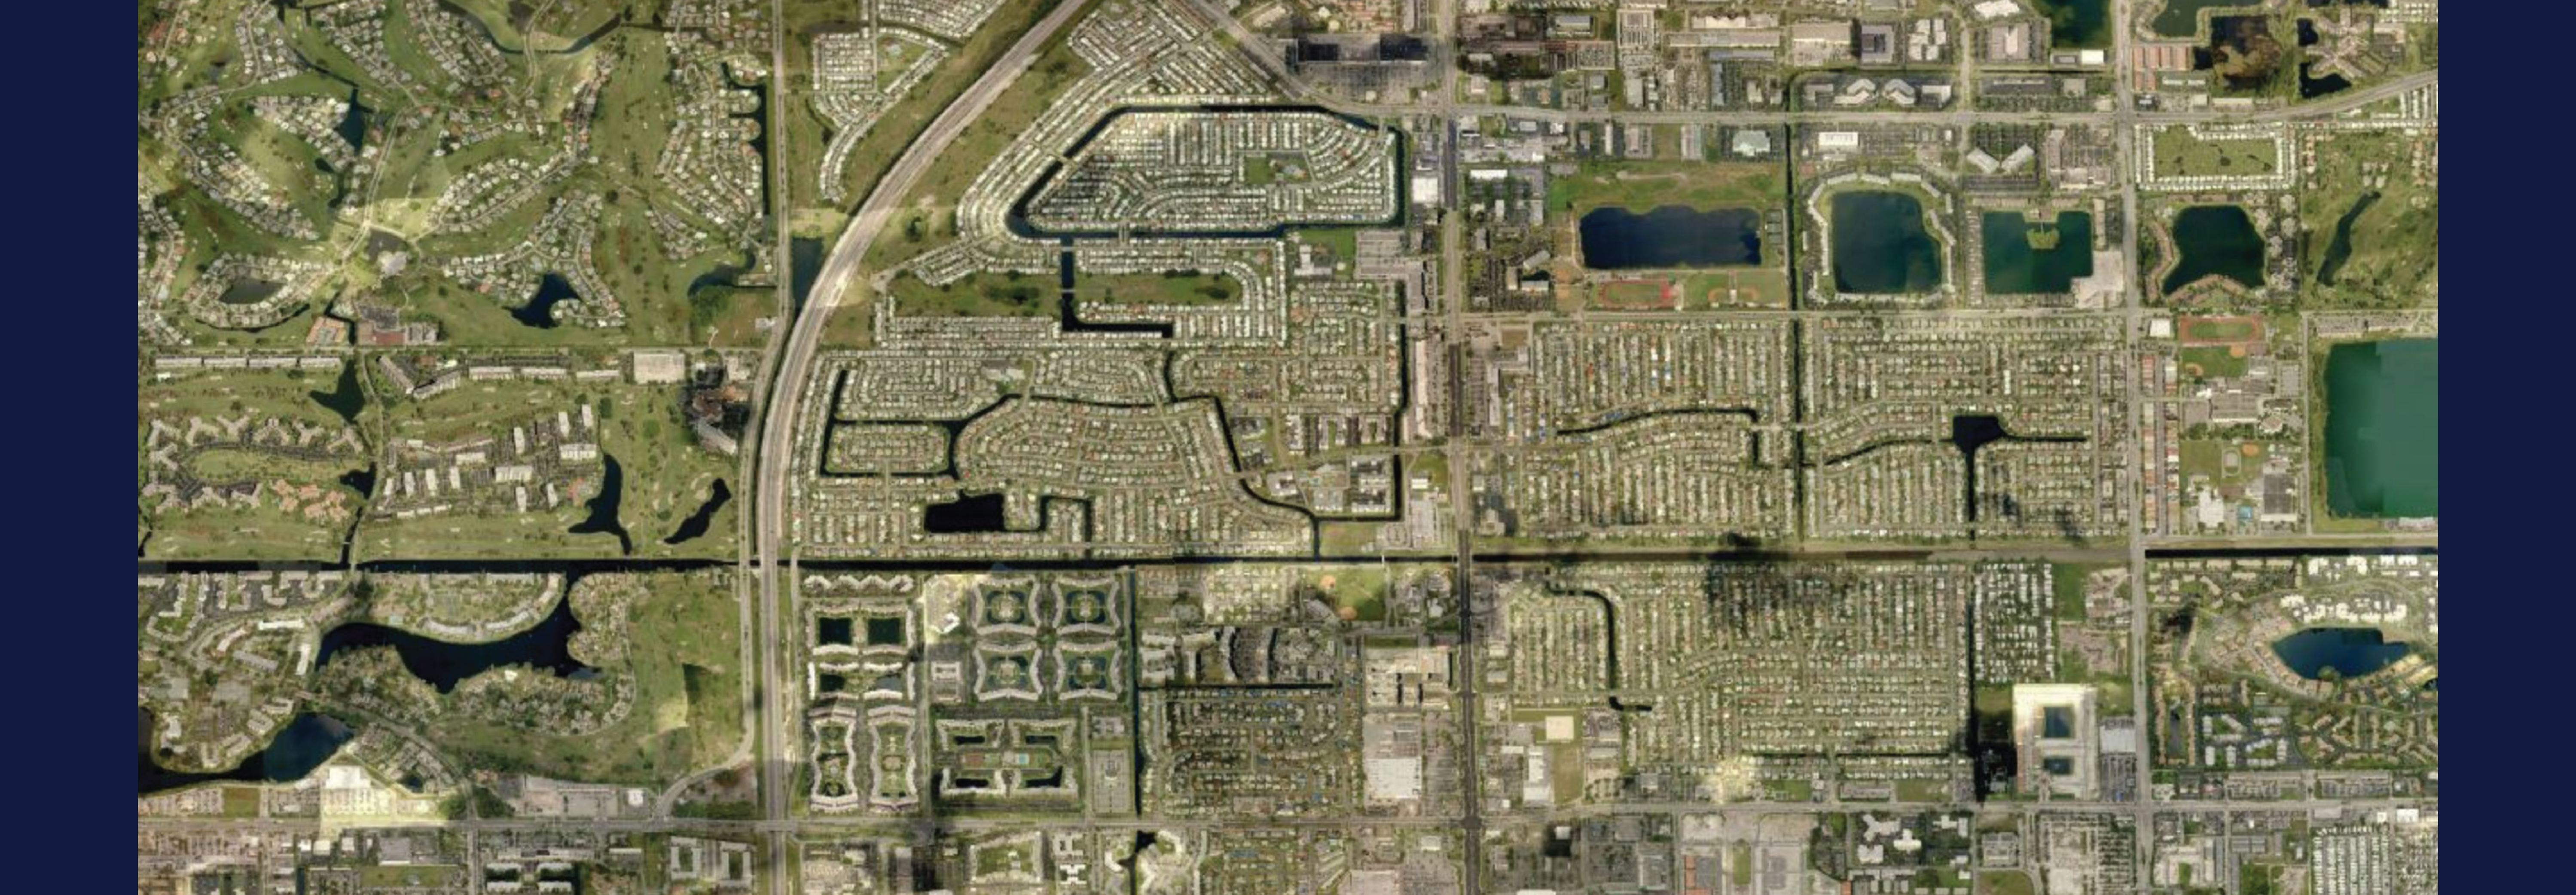 Lauderdale Lakes, Florida. Aerial view of tax parcels for tax assessors using GIS.